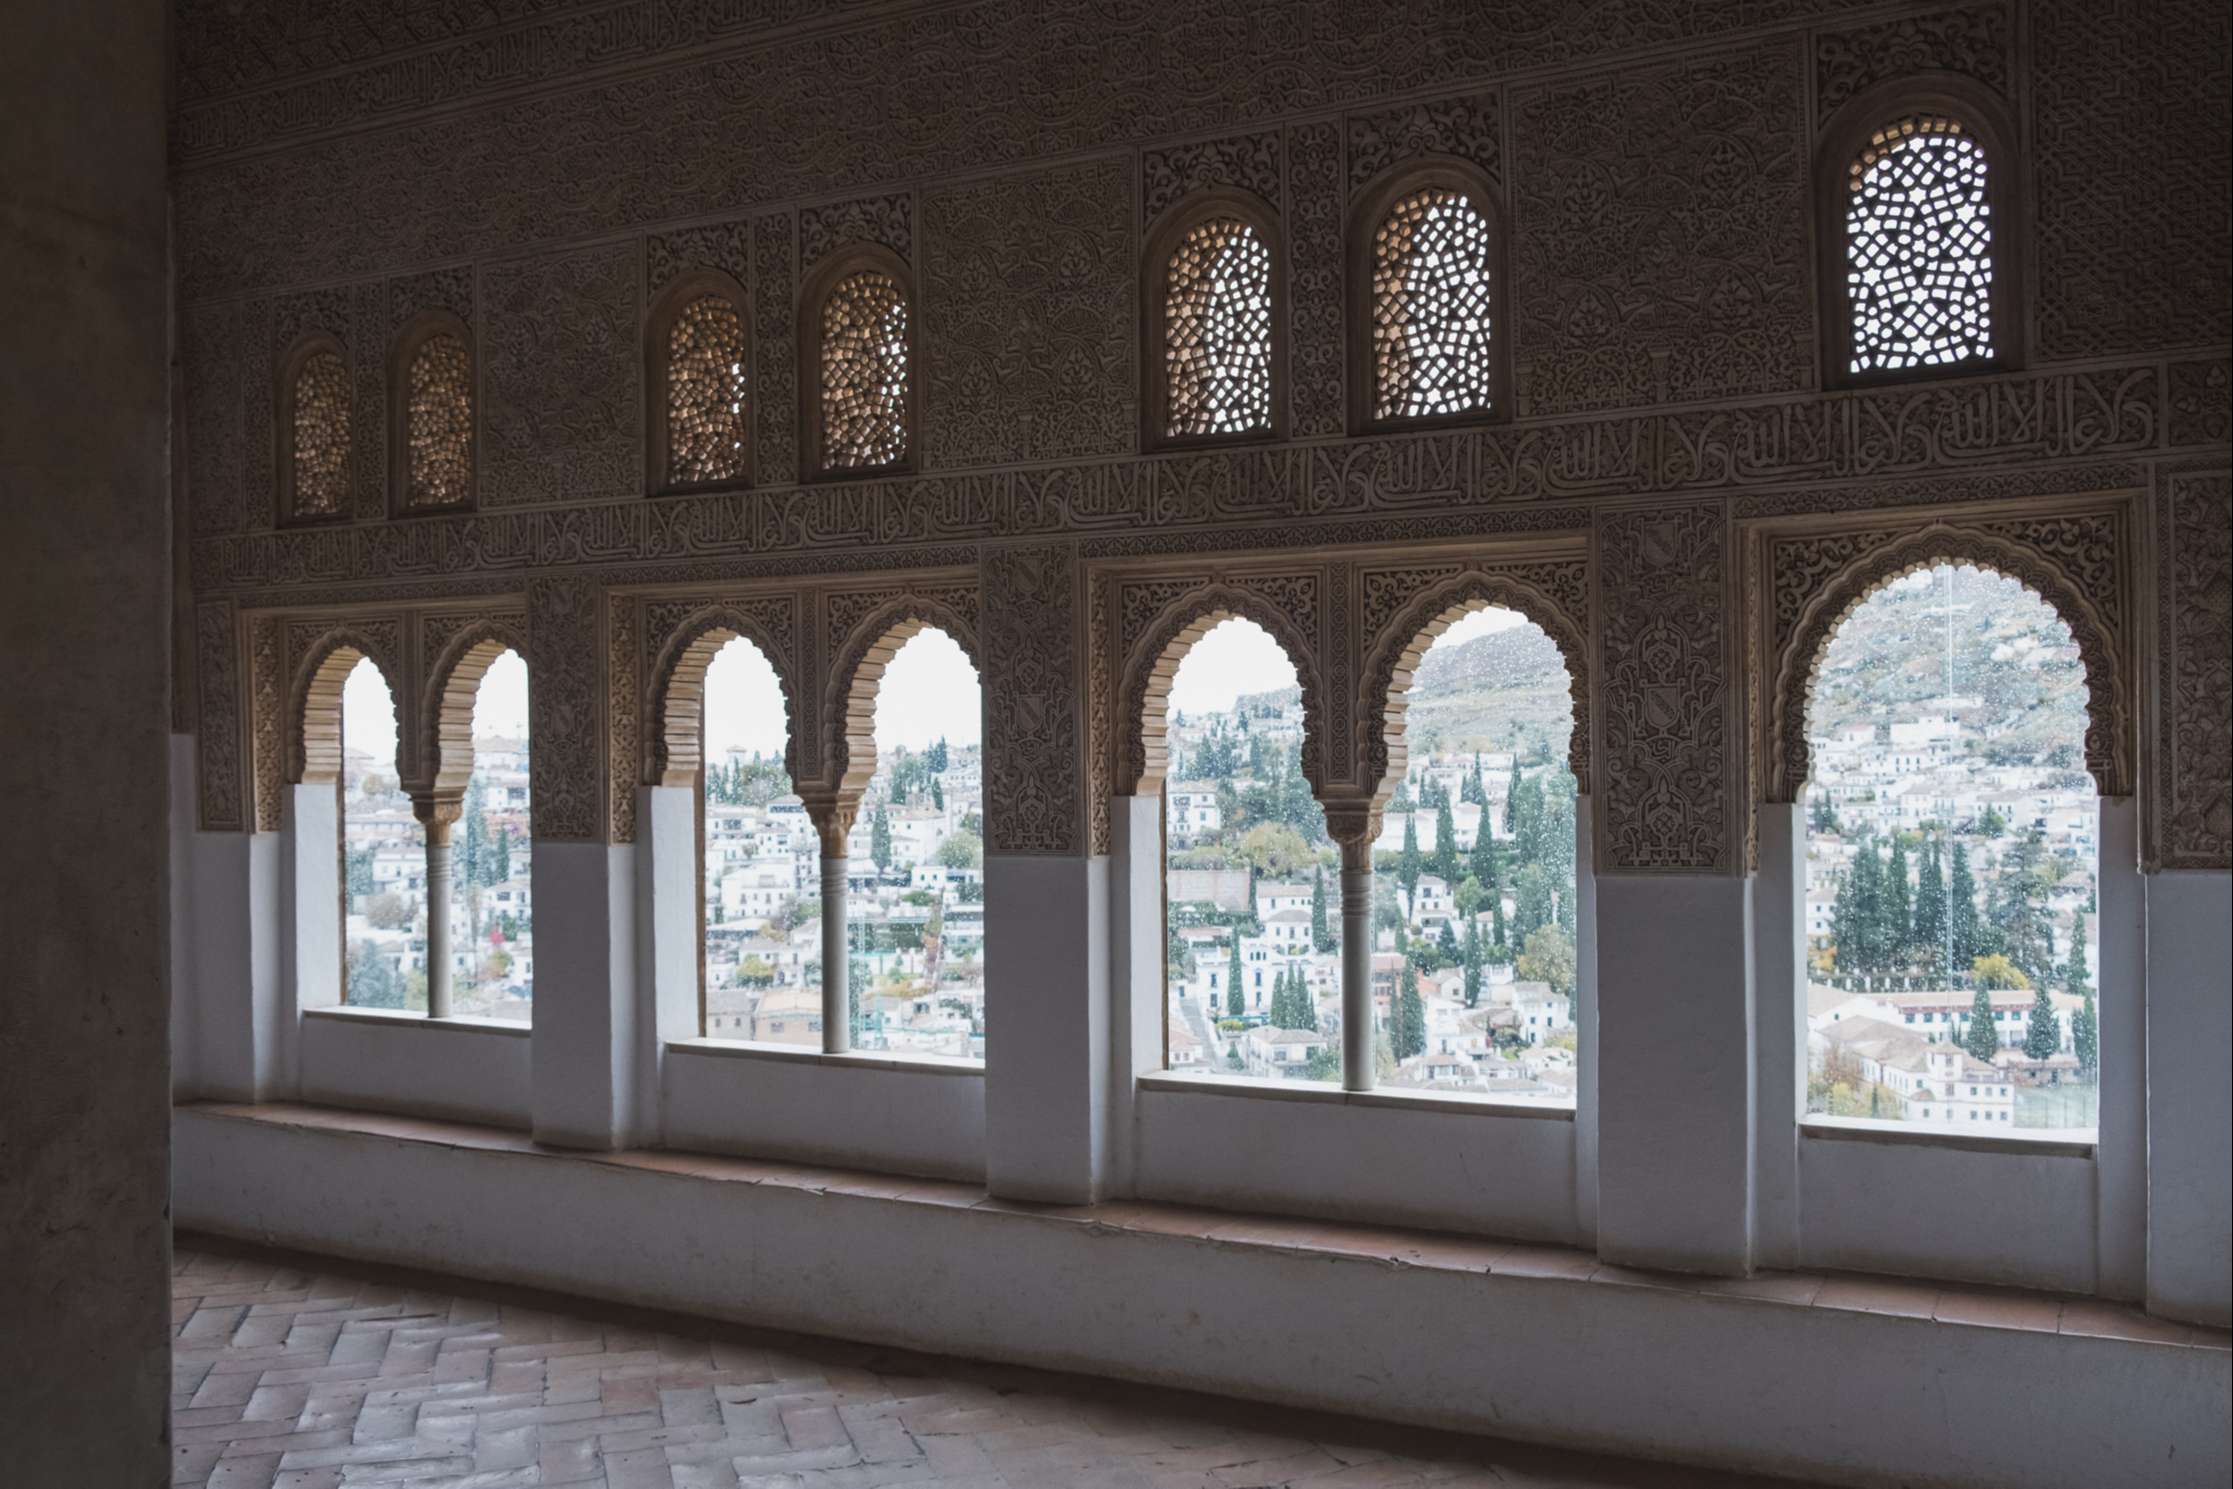 The view over Granada through arched windows in the Alhambra